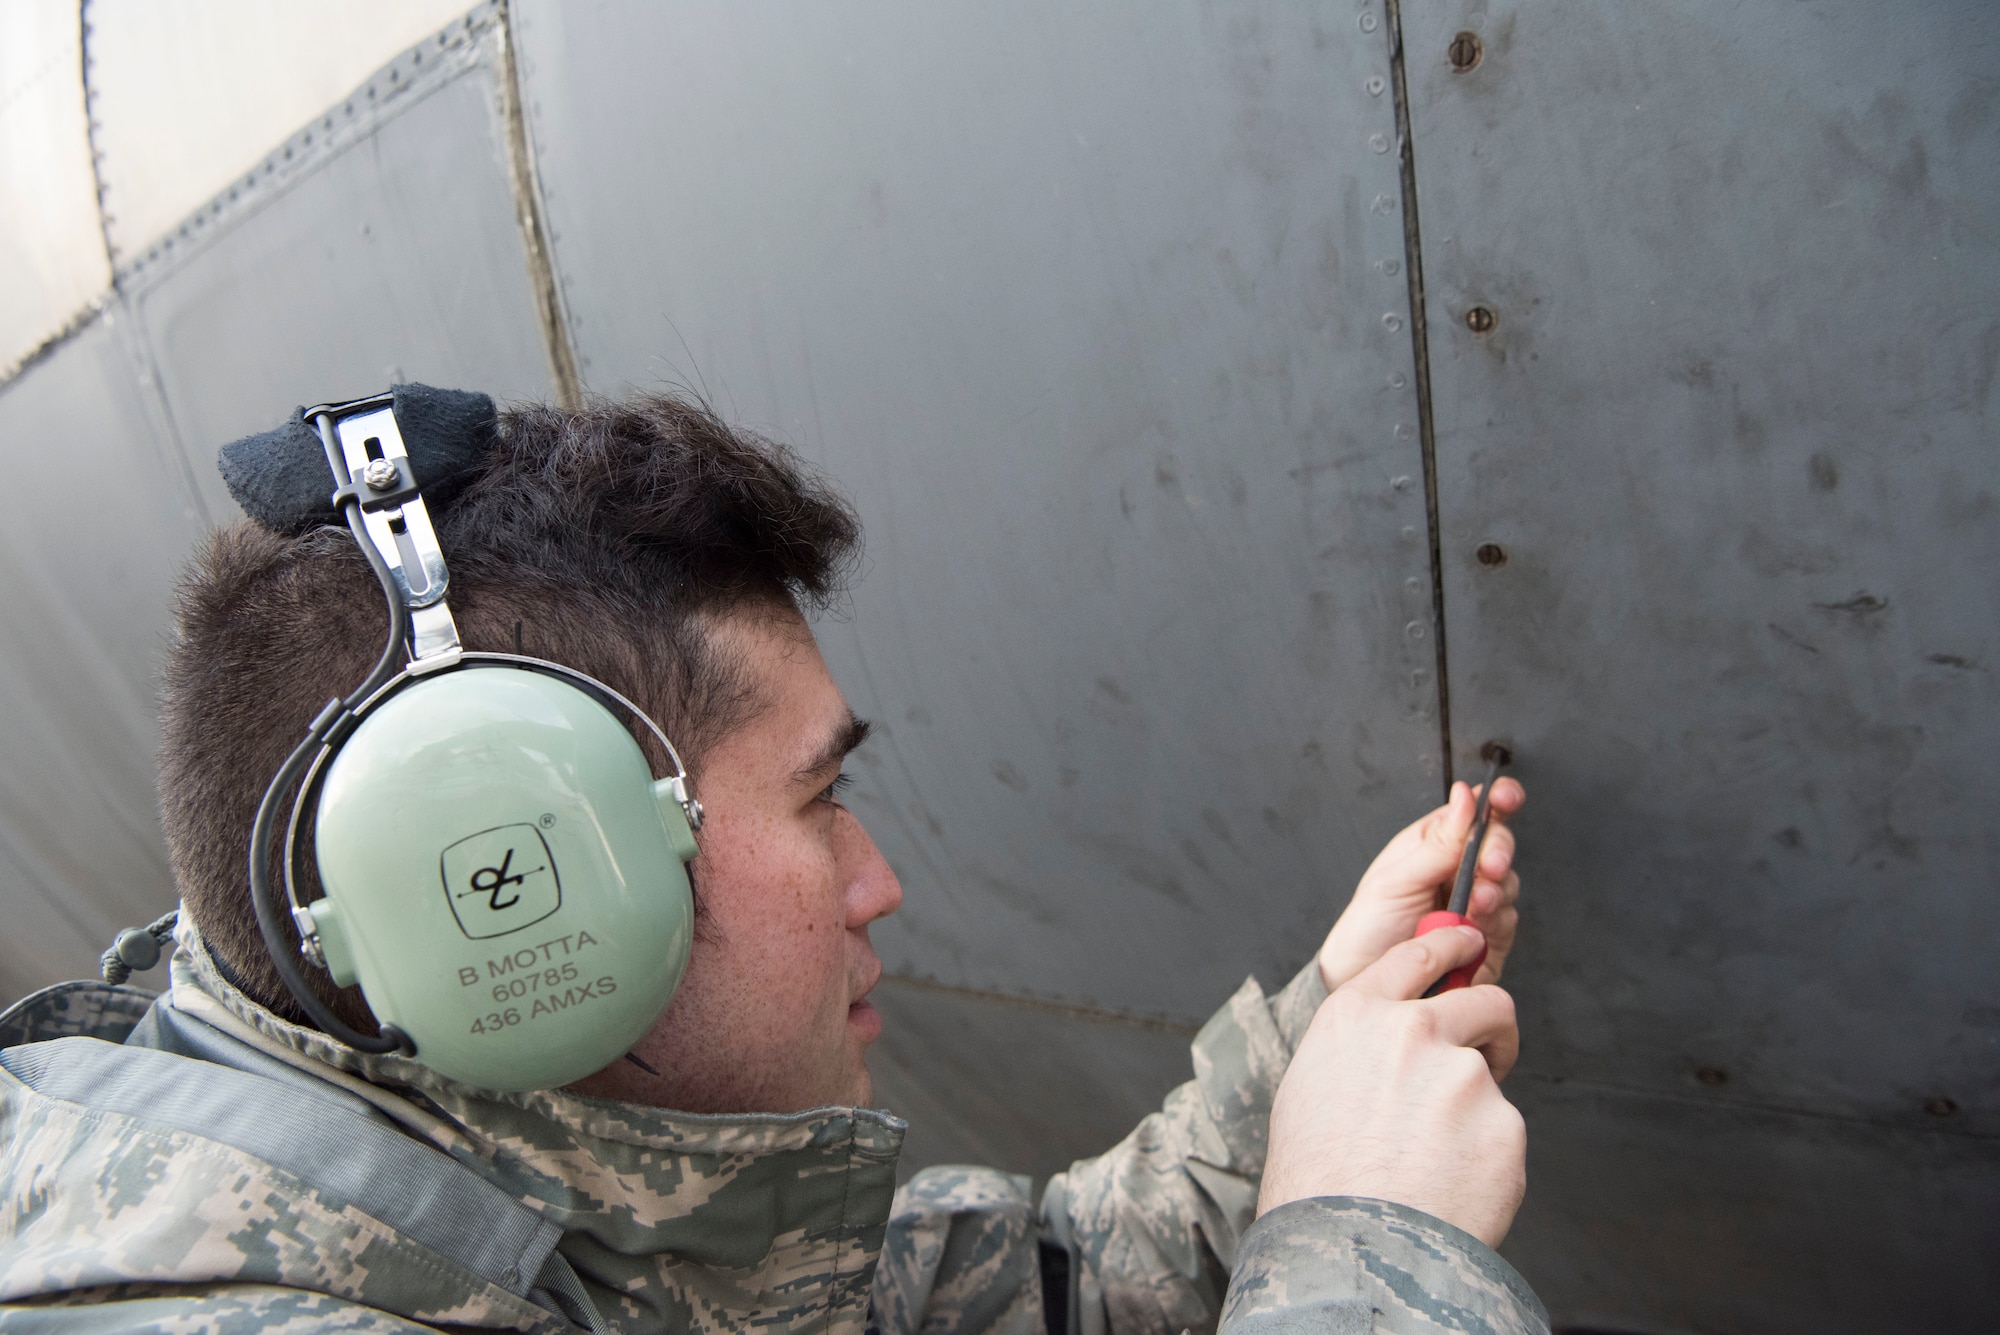 U.S. Air Force Staff Sgt. Brian Motta, 521st Air Mobility Operations Wing communications navigations journeyman, closes a door on a C-5M Super Galaxy aircraft after checking the auxiliary power unit oil Dec. 4, 2018, on Ramstein Air Base, Germany. This task was one of the approximately 1,000 tasks 141 students learned and trained on throughout the two week training exercise. (U.S. Air Force photo by Airman 1st Class Kristof J. Rixmann)